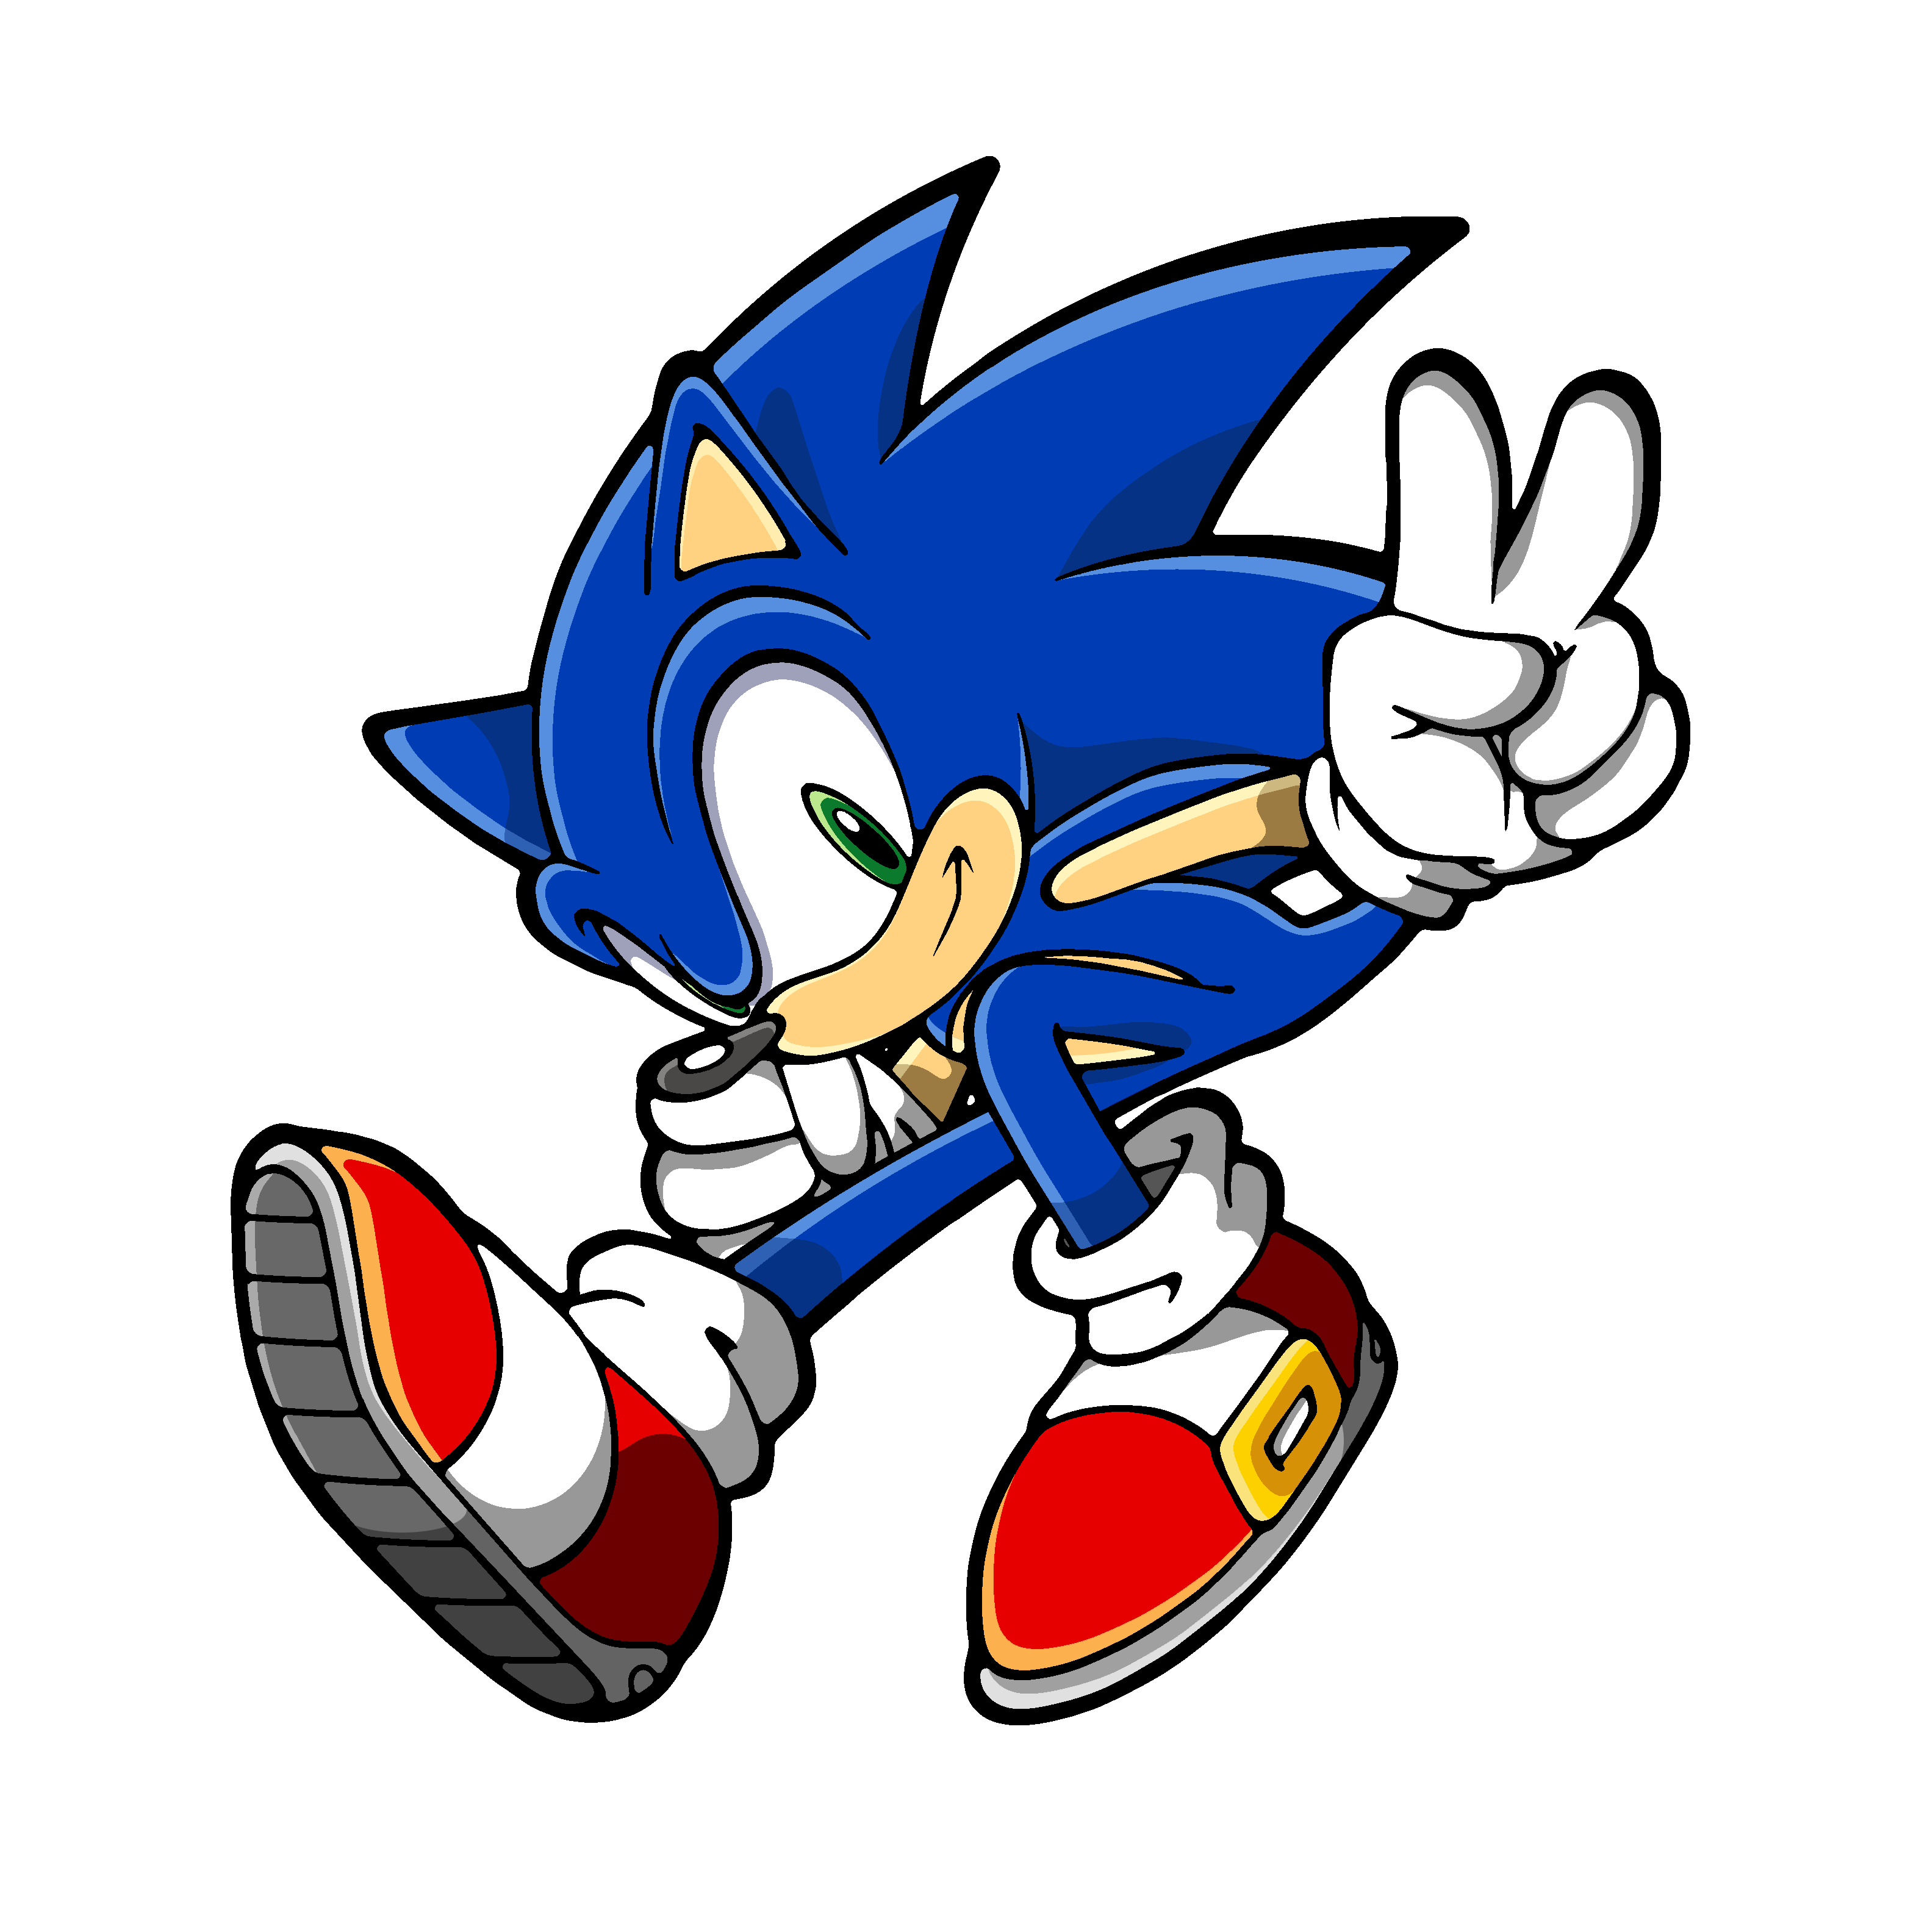 Download Sonic The Hedgehog Transparent HQ PNG Image In Different